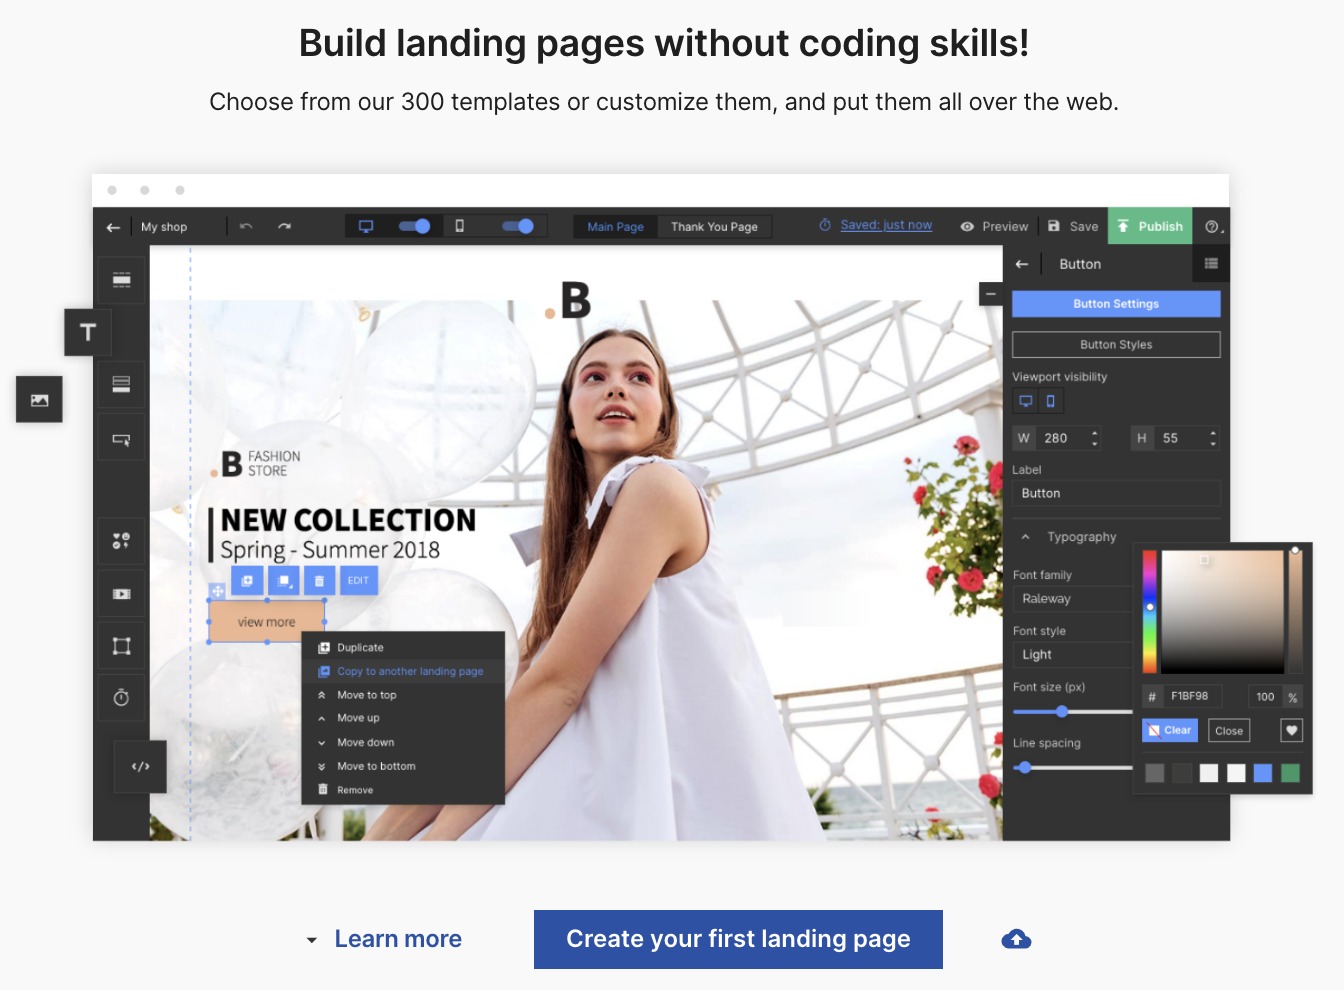  Landing Page Builder's interface for new users. The editor interface is displayed in the center. Below that are two buttons: "create your first landing page" and a cloud-shaped upload button.